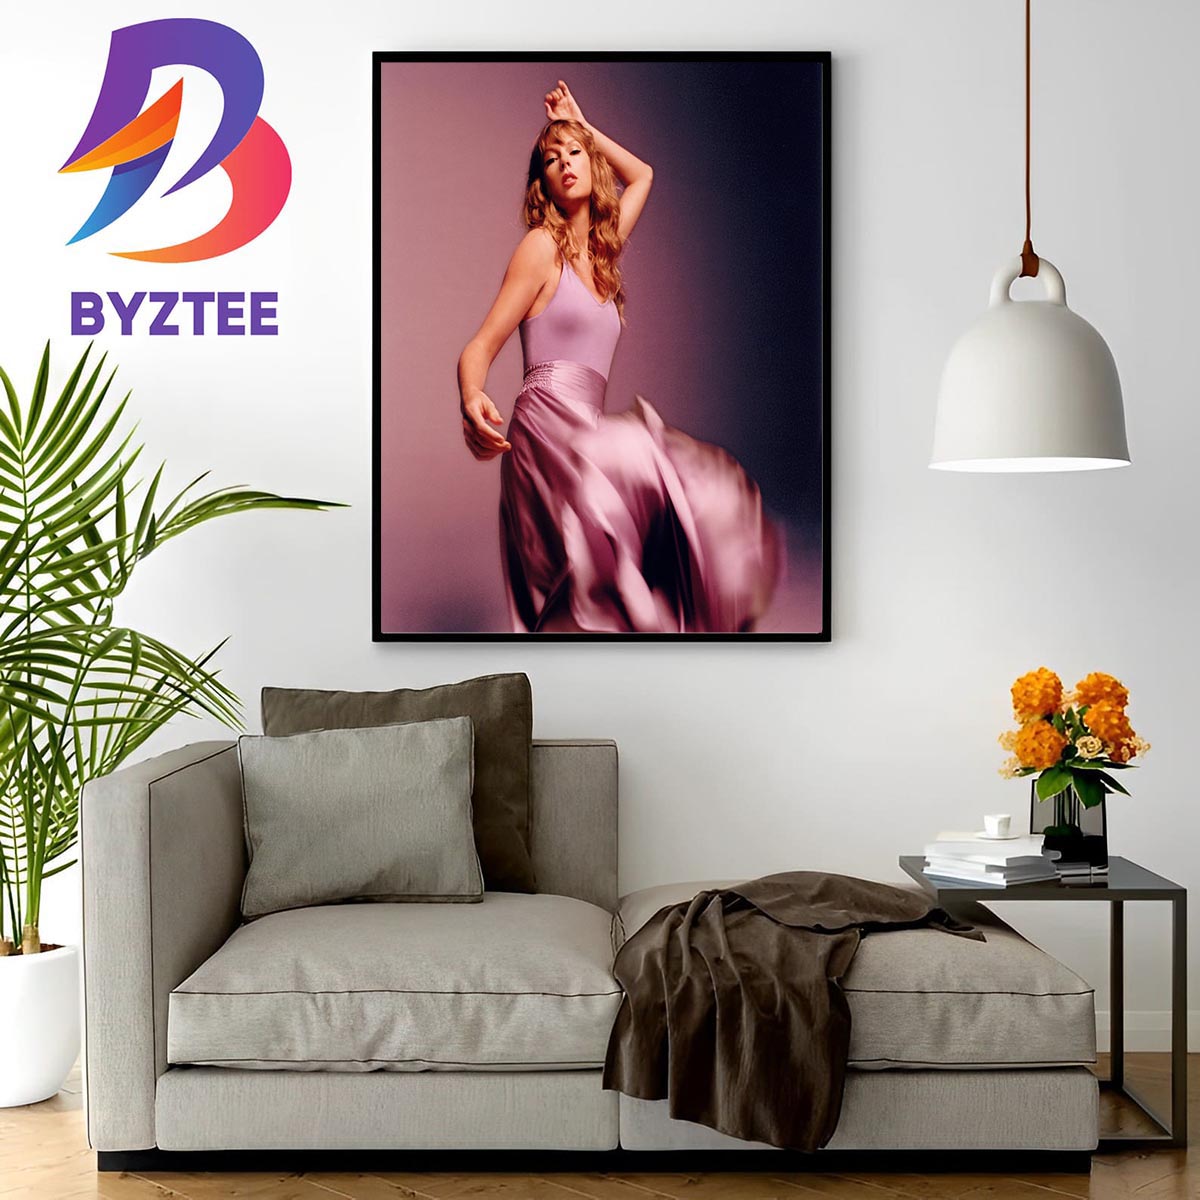 Taylor Swift For Speak Now Taylor Version Home Decor Poster Canvas - Byztee